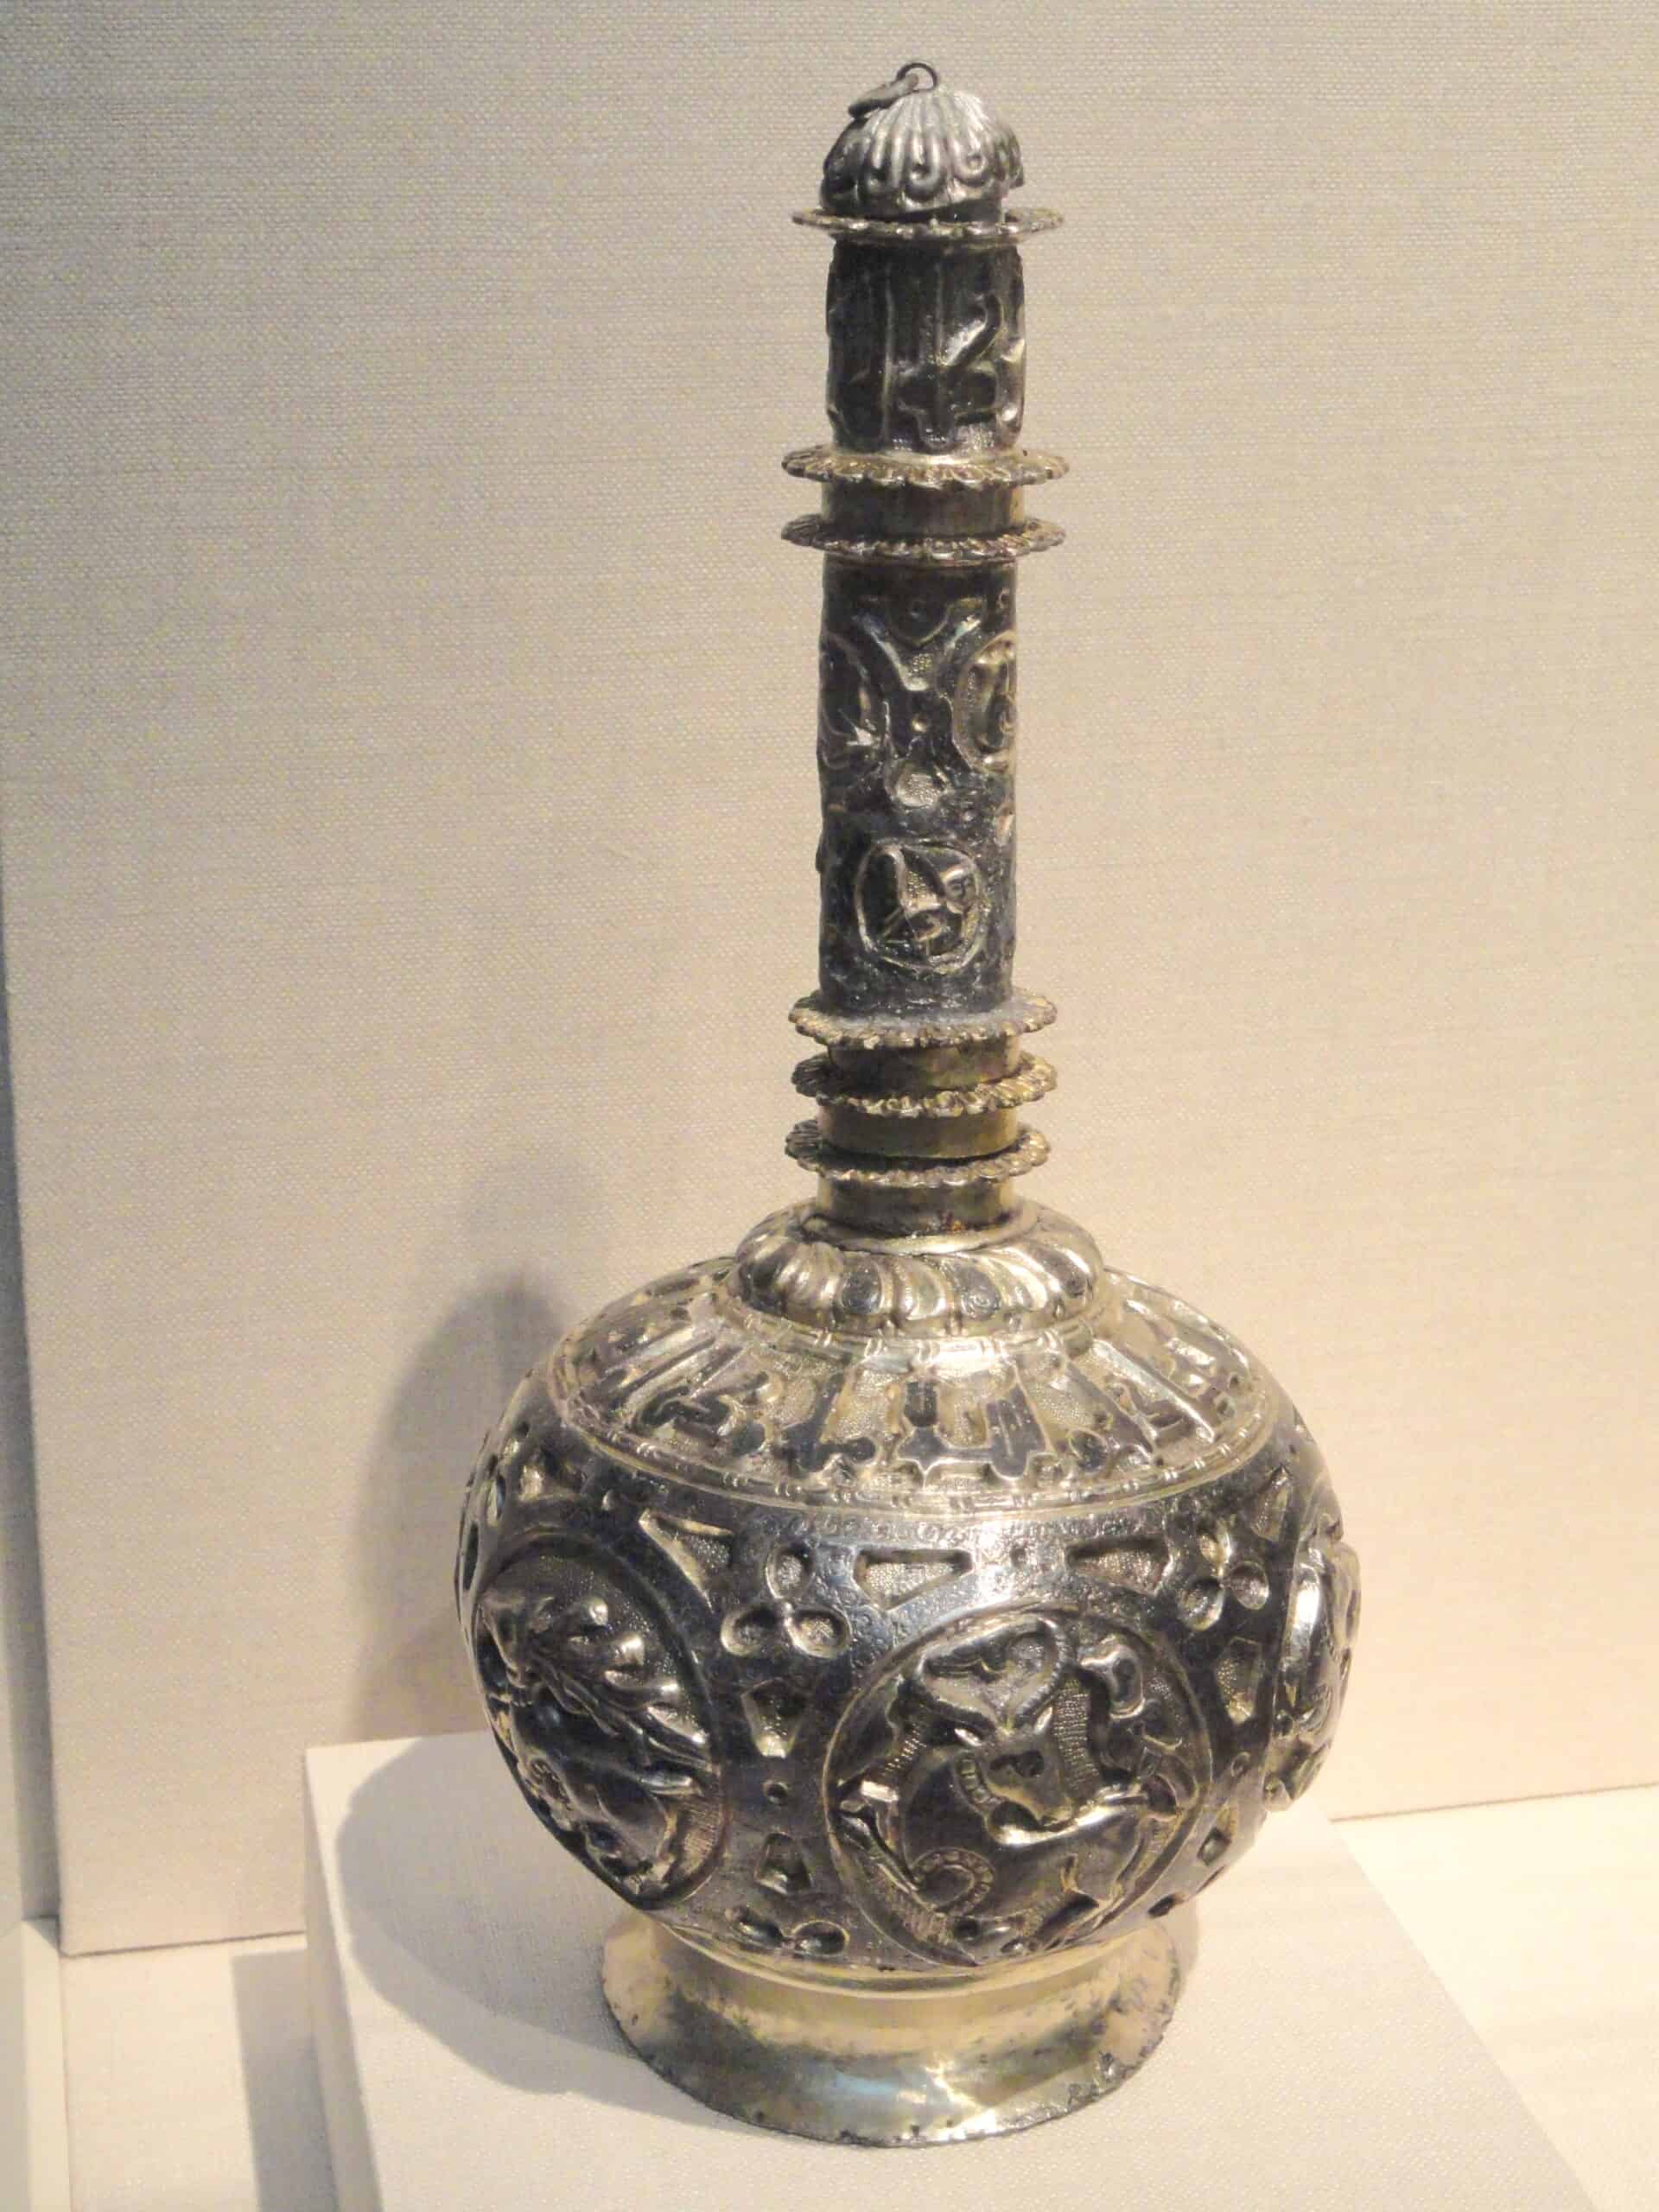 A photograph of a silver vessel 